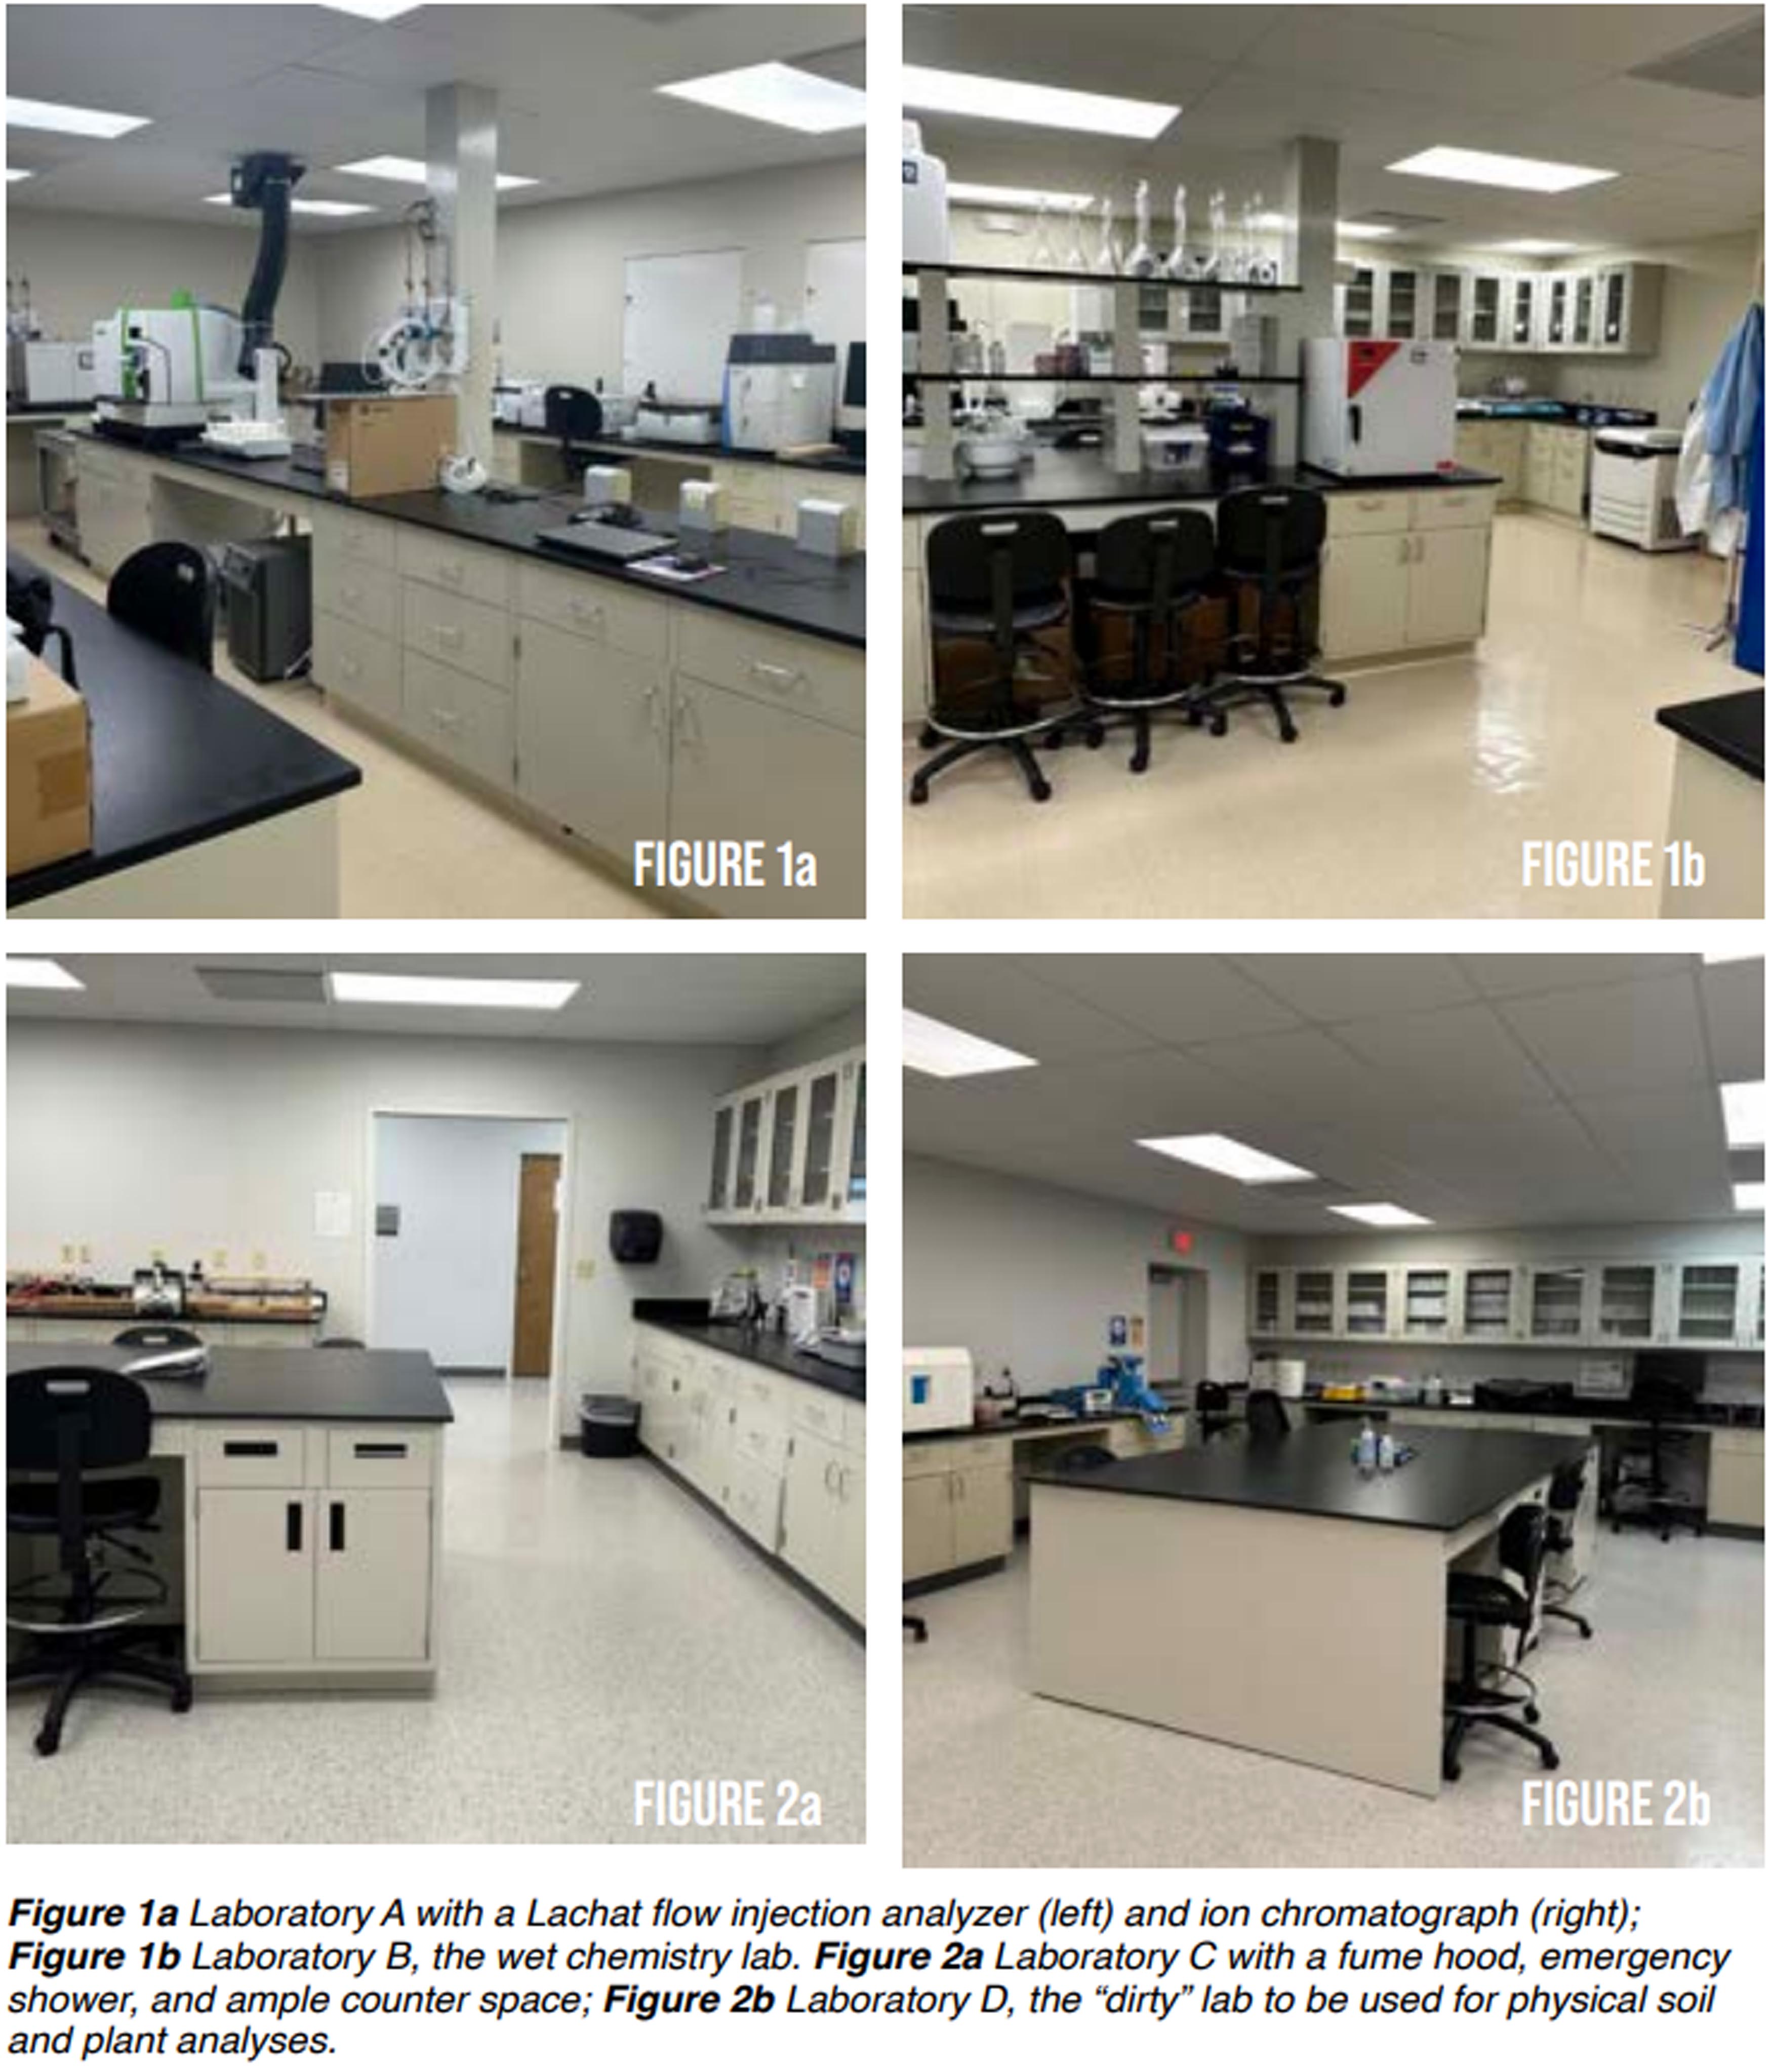 NCAAR laboratory renovations and construction
complete